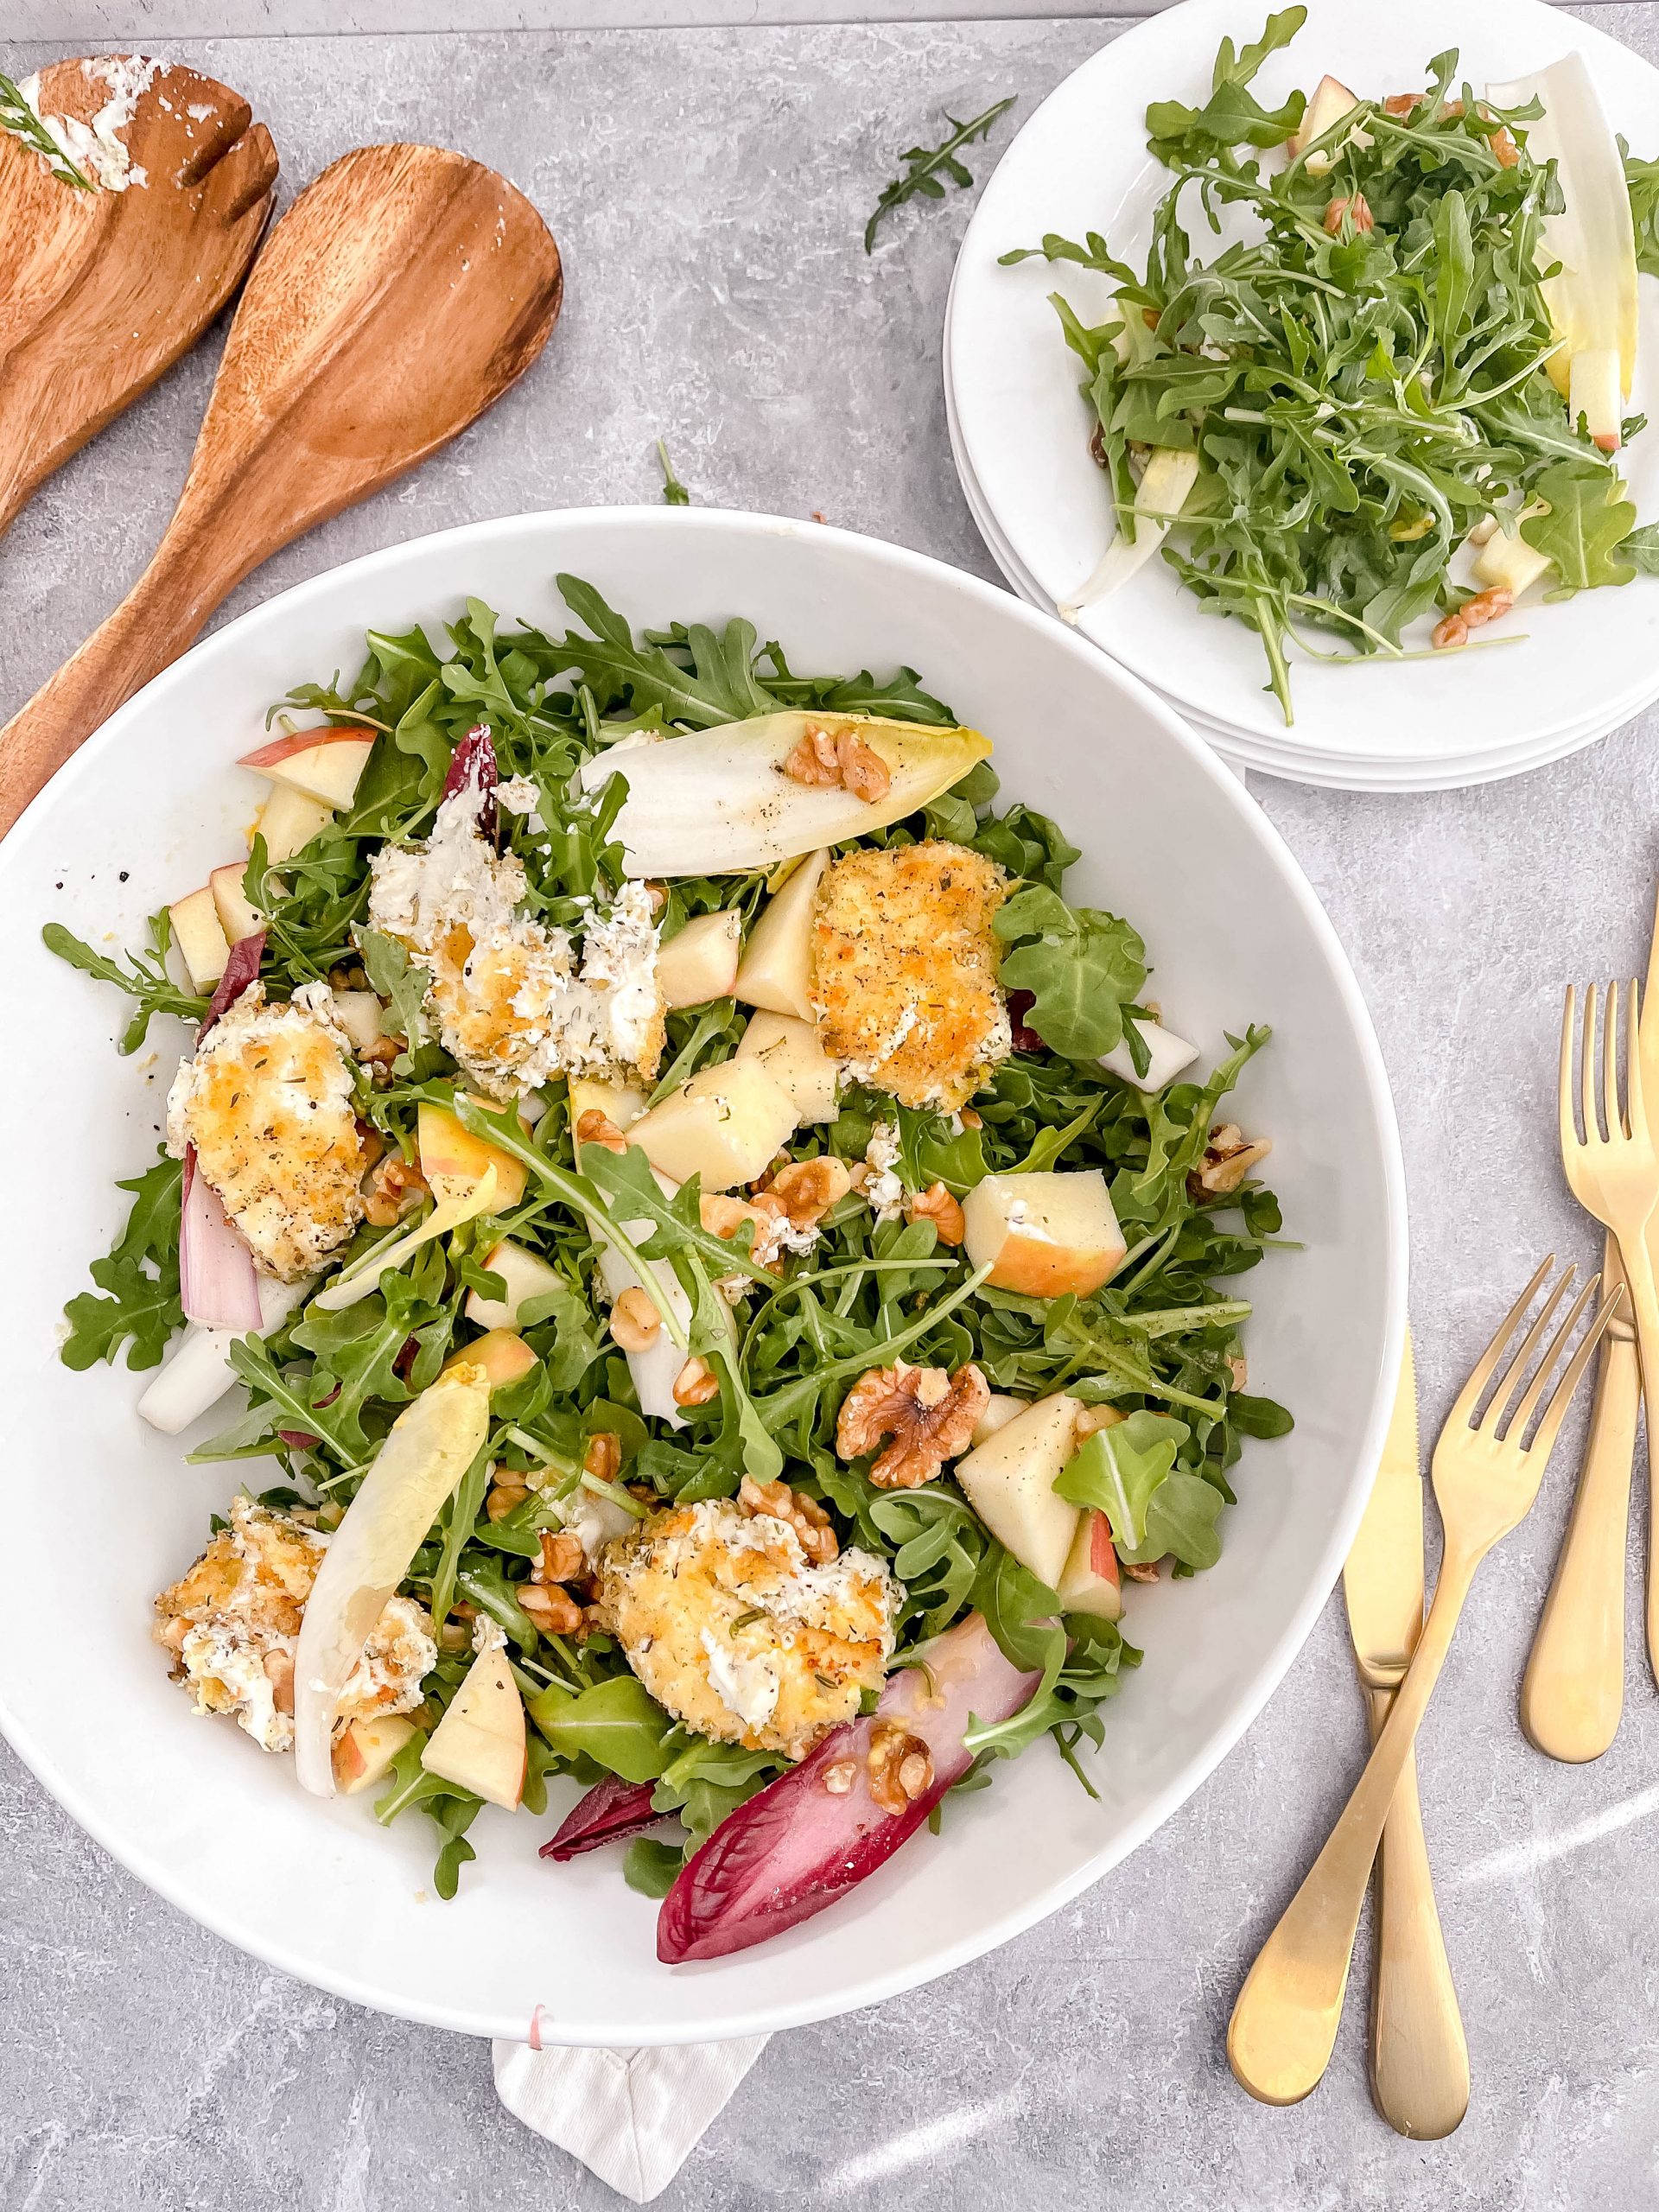 Fried Goat Cheese Salad with Arugula and Endive